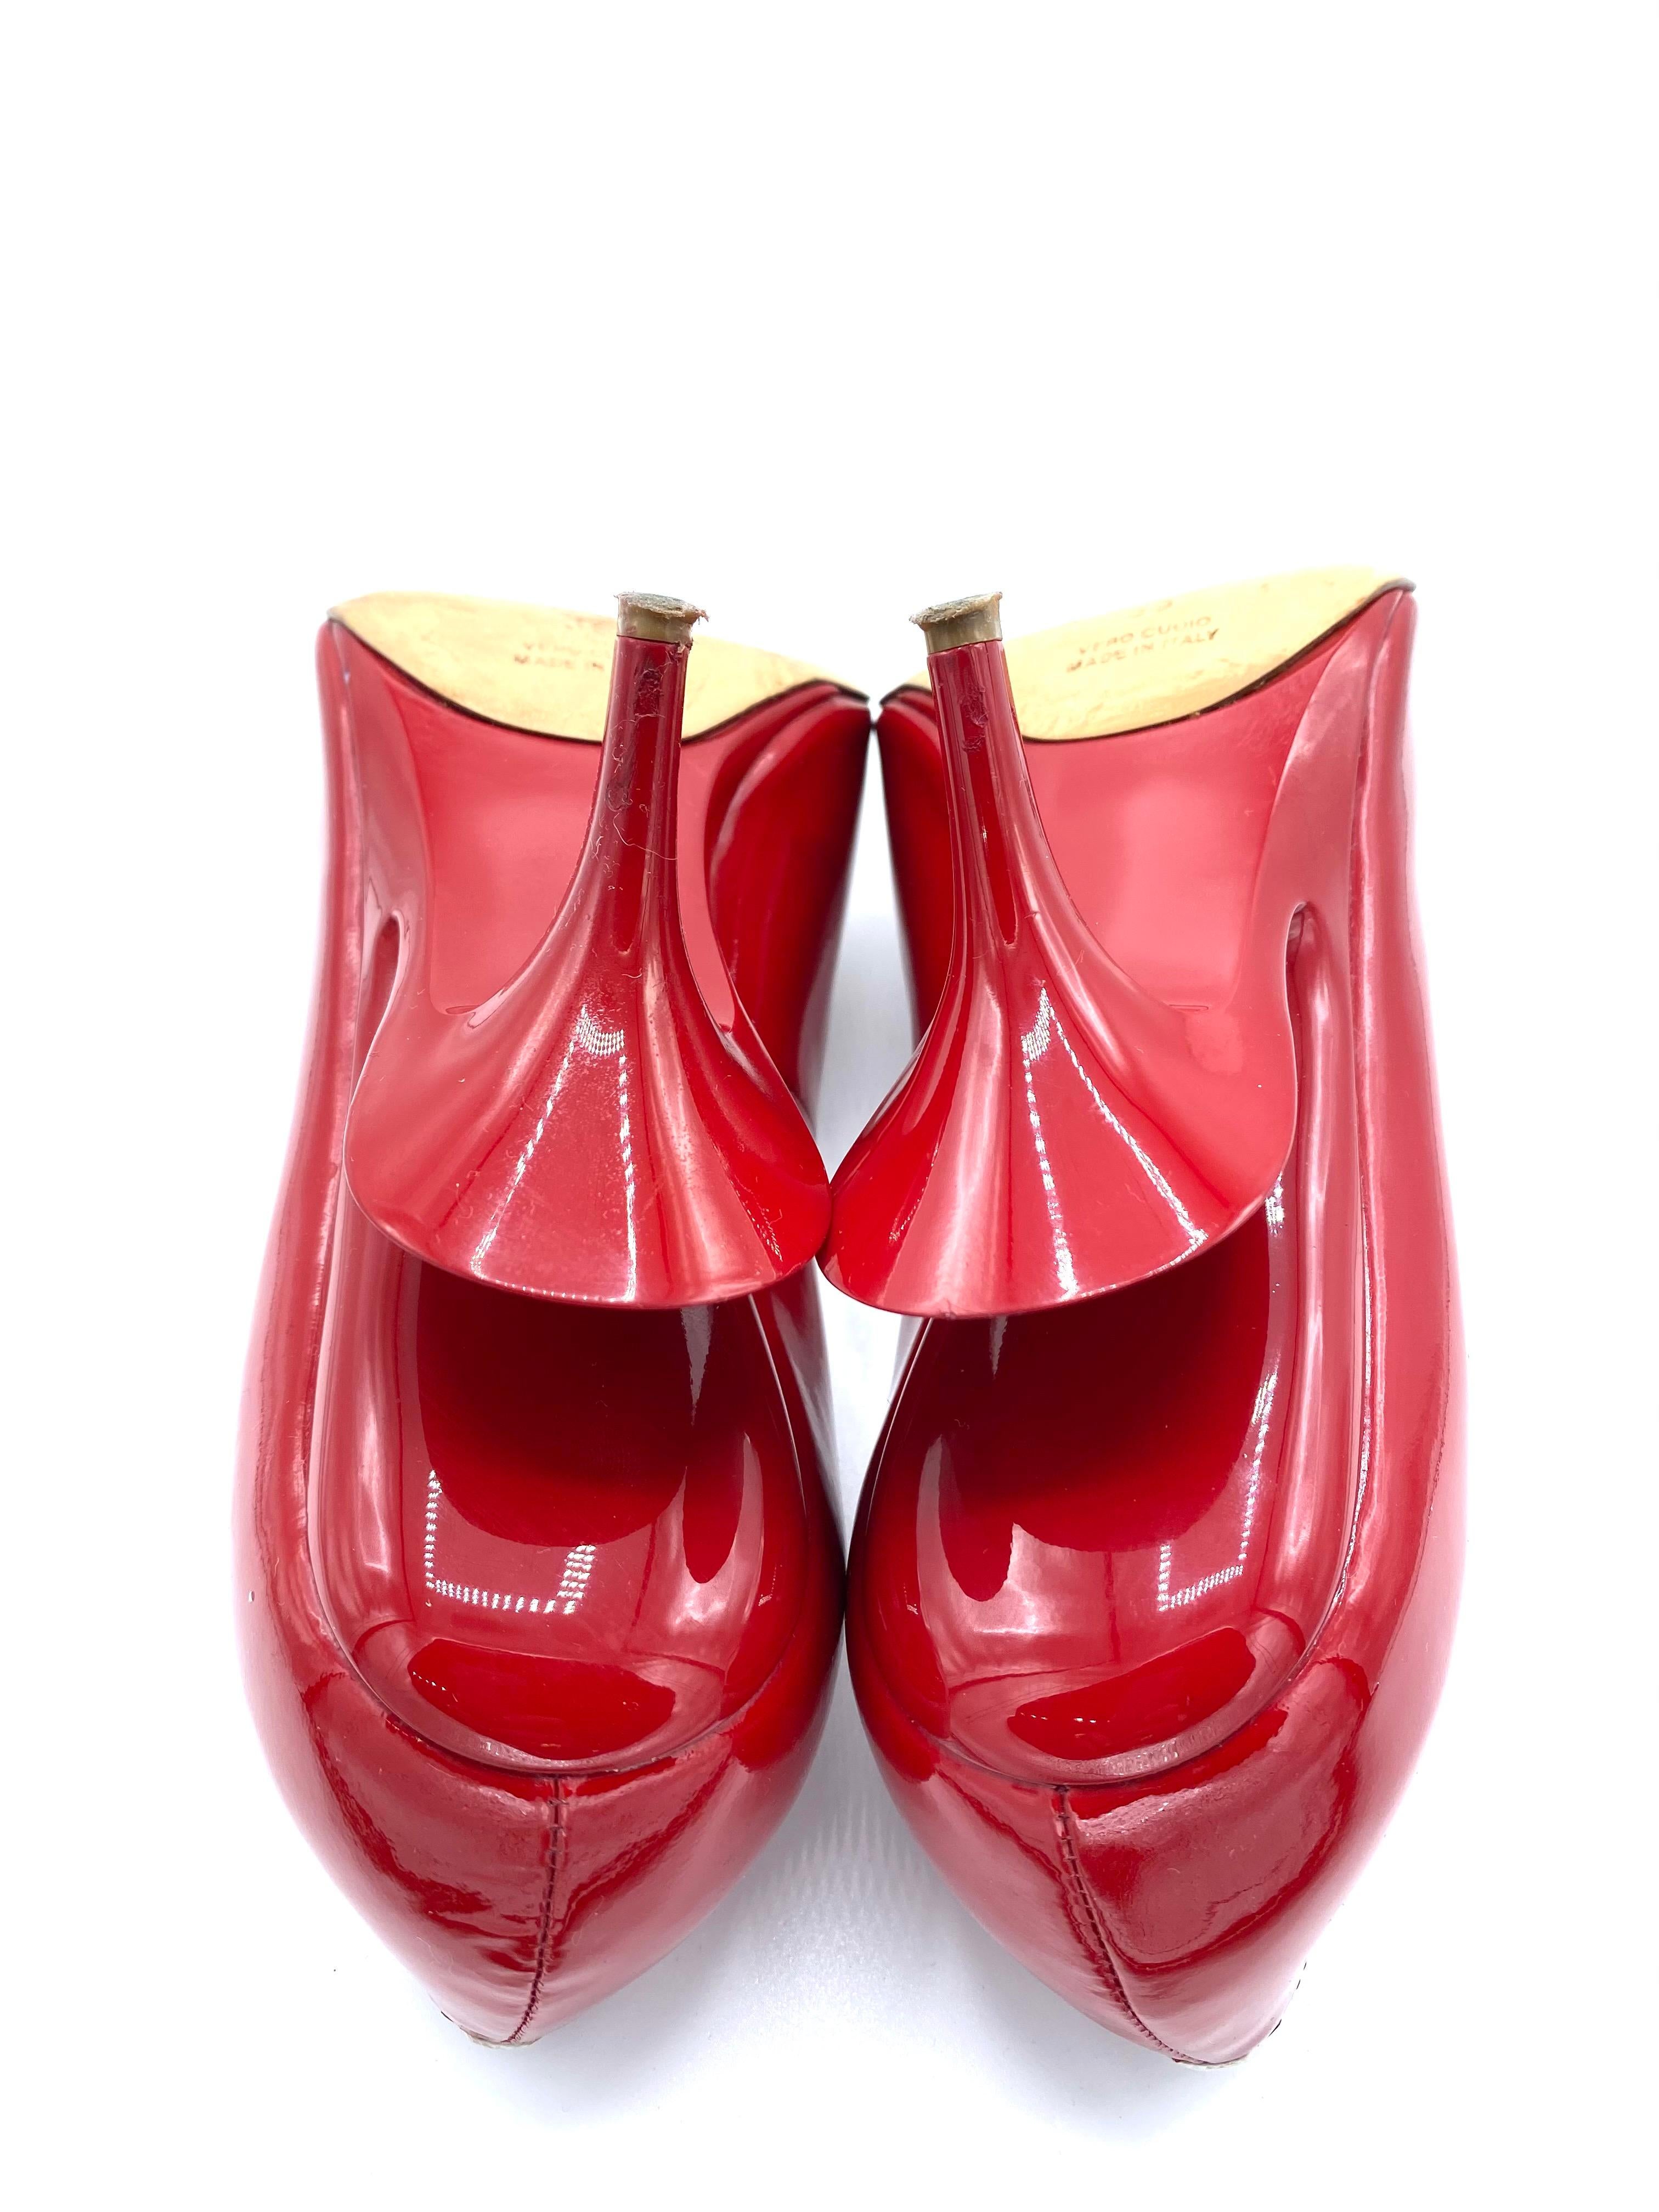 Maison Margiela Red Patent Leather Pump Heels Size 38 For Sale 3